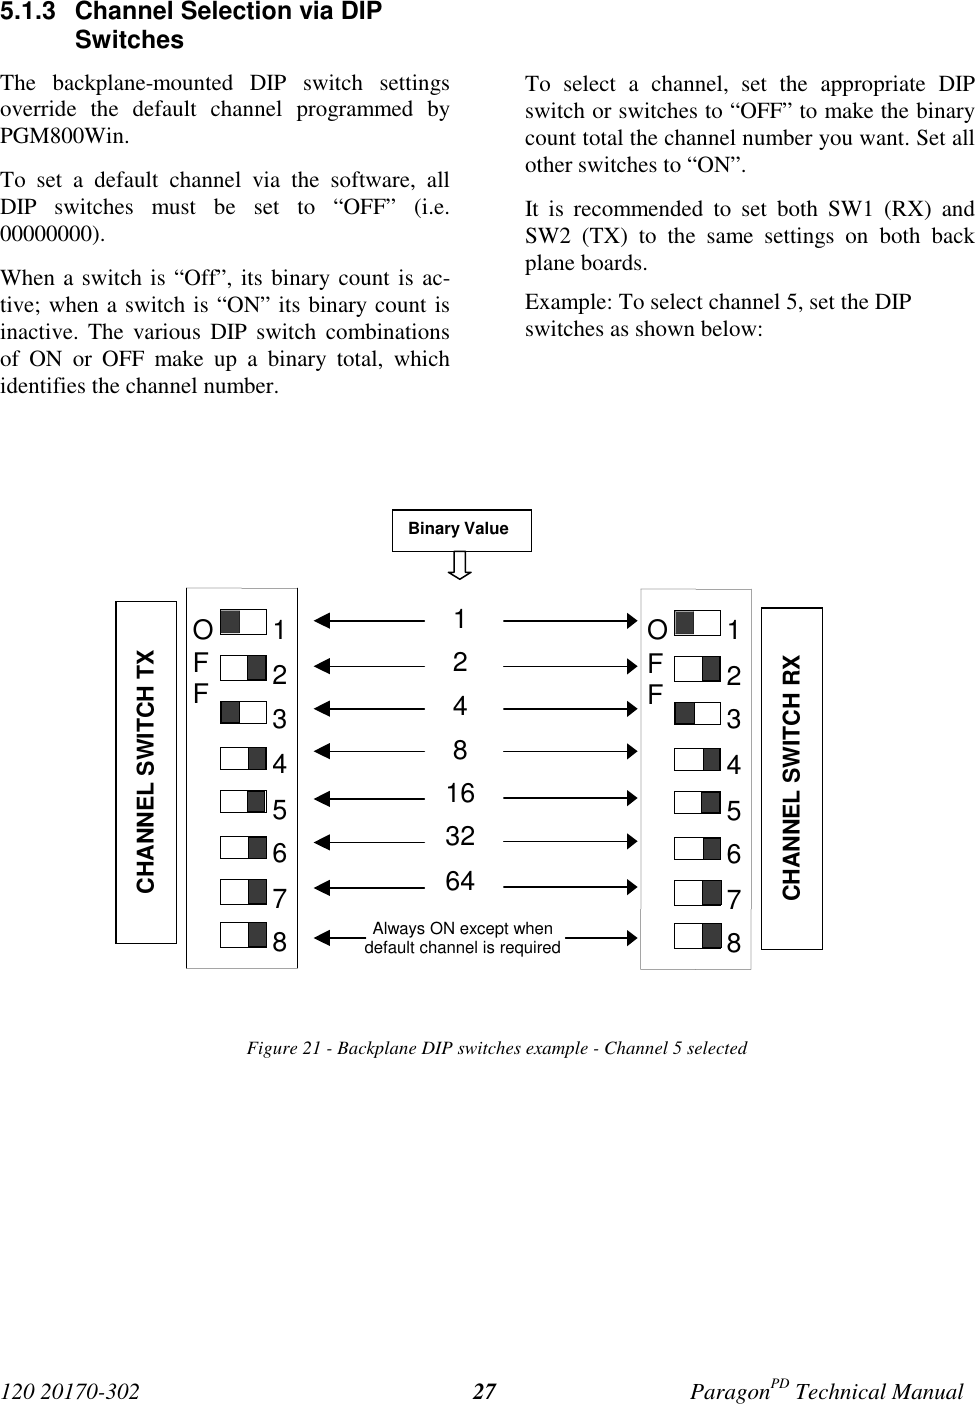 120 20170-302 ParagonPD Technical Manual275.1.3  Channel Selection via DIPSwitchesThe backplane-mounted DIP switch settingsoverride the default channel programmed byPGM800Win.To set a default channel via the software, allDIP switches must be set to “OFF” (i.e.00000000).When a switch is “Off”, its binary count is ac-tive; when a switch is “ON” its binary count isinactive. The various DIP switch combinationsof ON or OFF make up a binary total, whichidentifies the channel number.To select a channel, set the appropriate DIPswitch or switches to “OFF” to make the binarycount total the channel number you want. Set allother switches to “ON”.It is recommended to set both SW1 (RX) andSW2 (TX) to the same settings on both backplane boards.Example: To select channel 5, set the DIPswitches as shown below:Figure 21 - Backplane DIP switches example - Channel 5 selectedBinary Value1248163264Always ON except whendefault channel is requiredCHANNEL SWITCH TXCHANNEL SWITCH RX12345678OFF12345678OFF